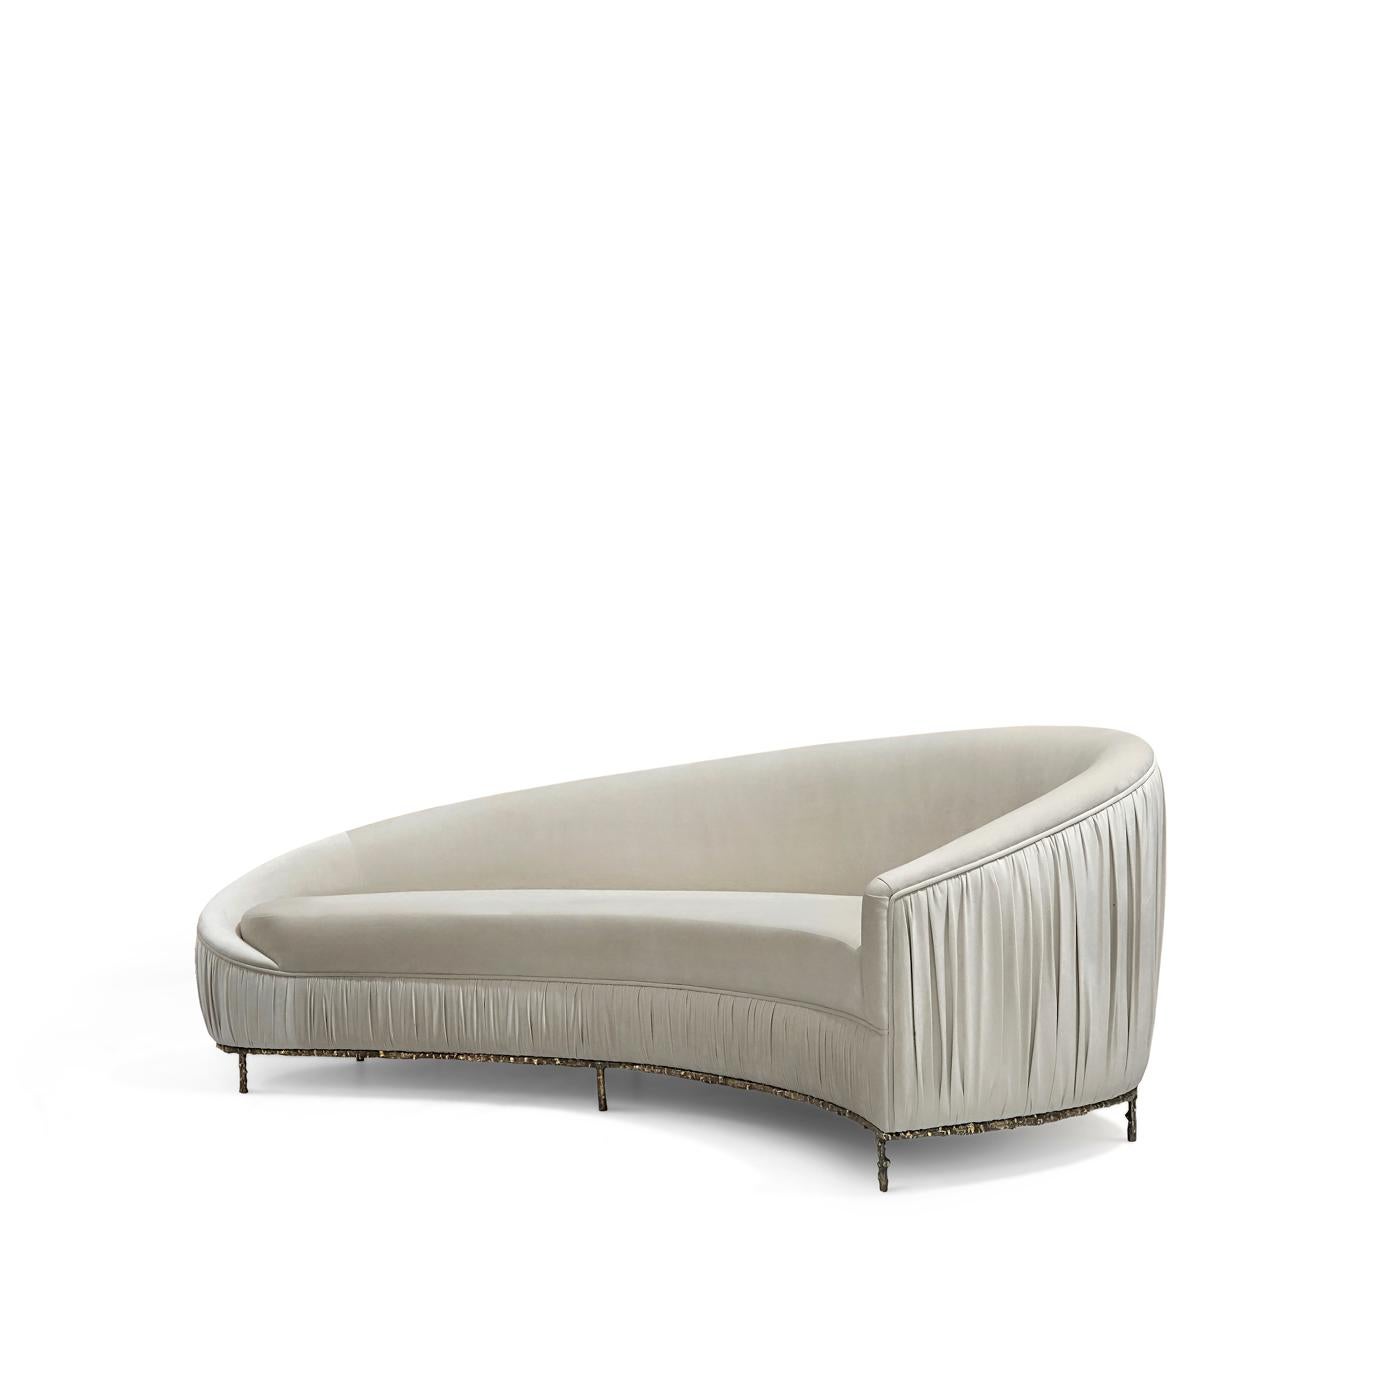 Sexy, mysterious and uninterrupted lines give this sofa highly acclaimed glamour. Upholstered in sumptuous fabric, the cast brass metal resembling a thorn bush branch serves as a base to this luscious lounge sofa.